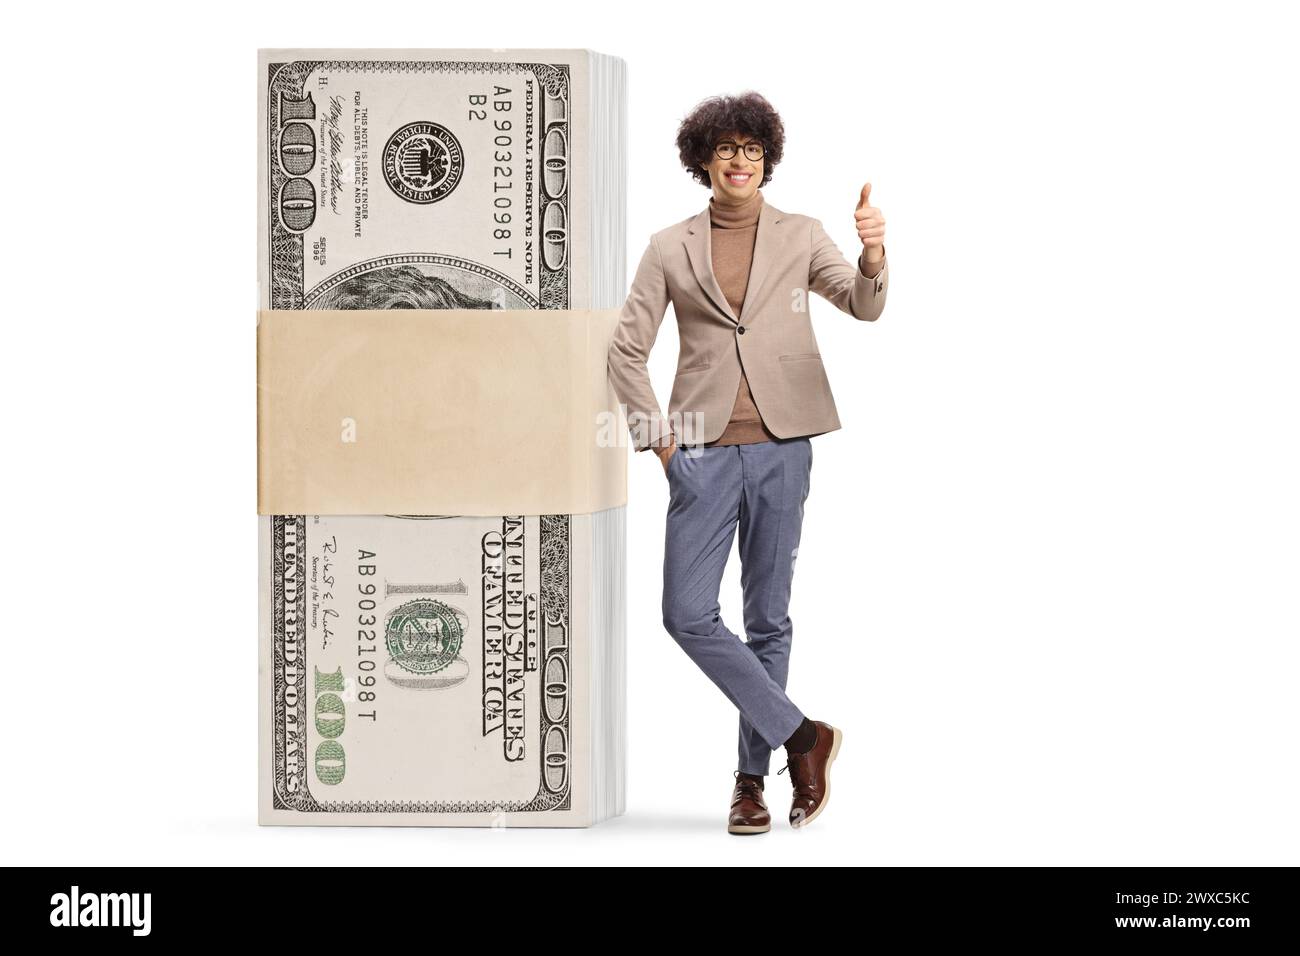 Young man leaning on a stack of money and gesturing thumbs up isolated on white background Stock Photo